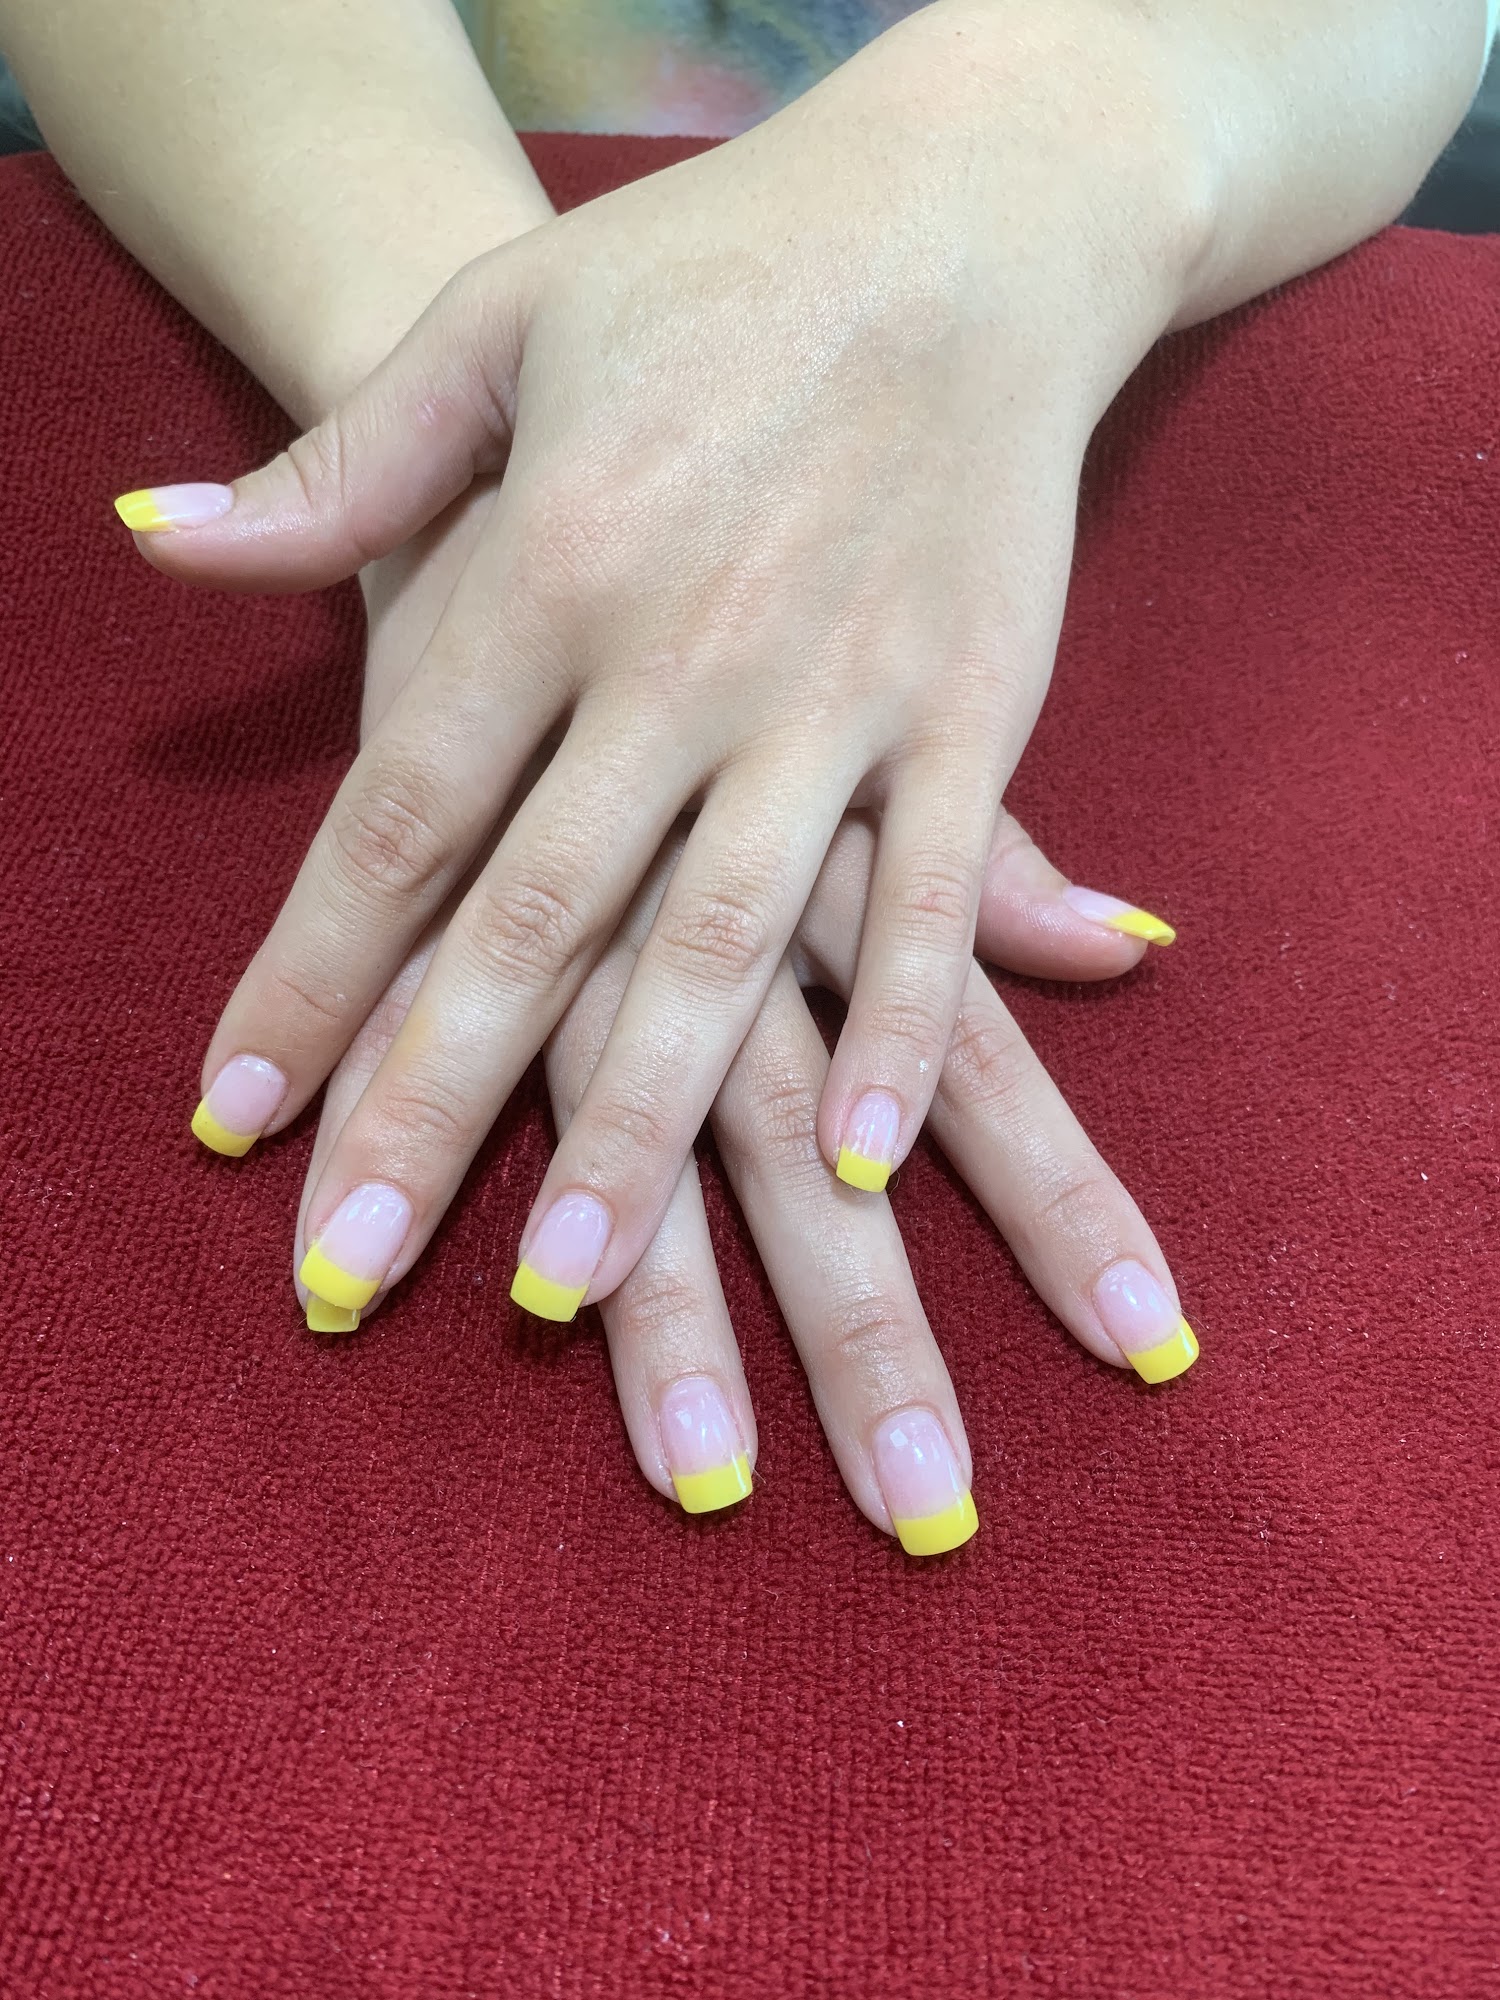 Lady's nails